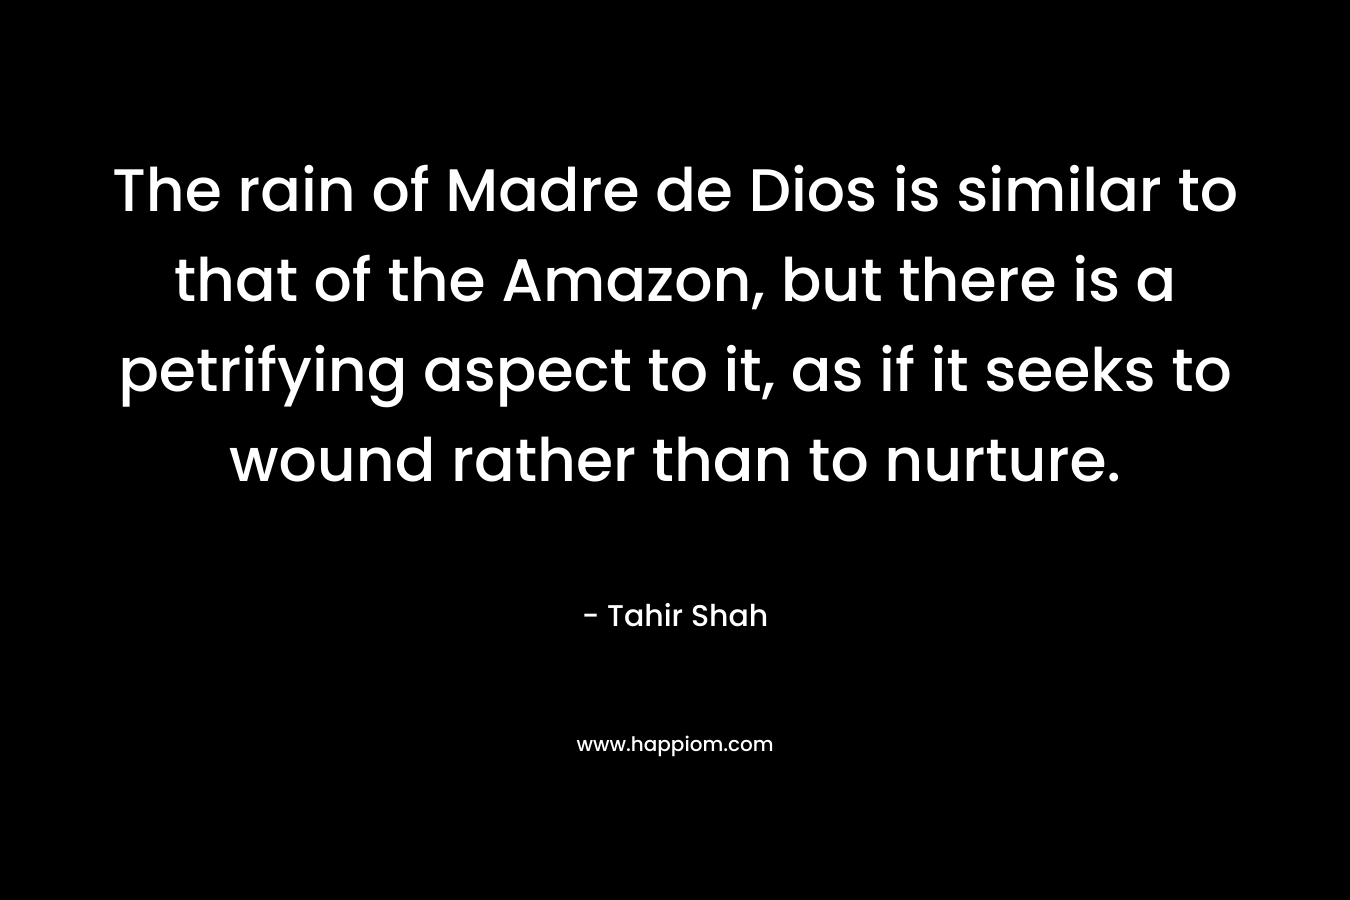 The rain of Madre de Dios is similar to that of the Amazon, but there is a petrifying aspect to it, as if it seeks to wound rather than to nurture. – Tahir Shah